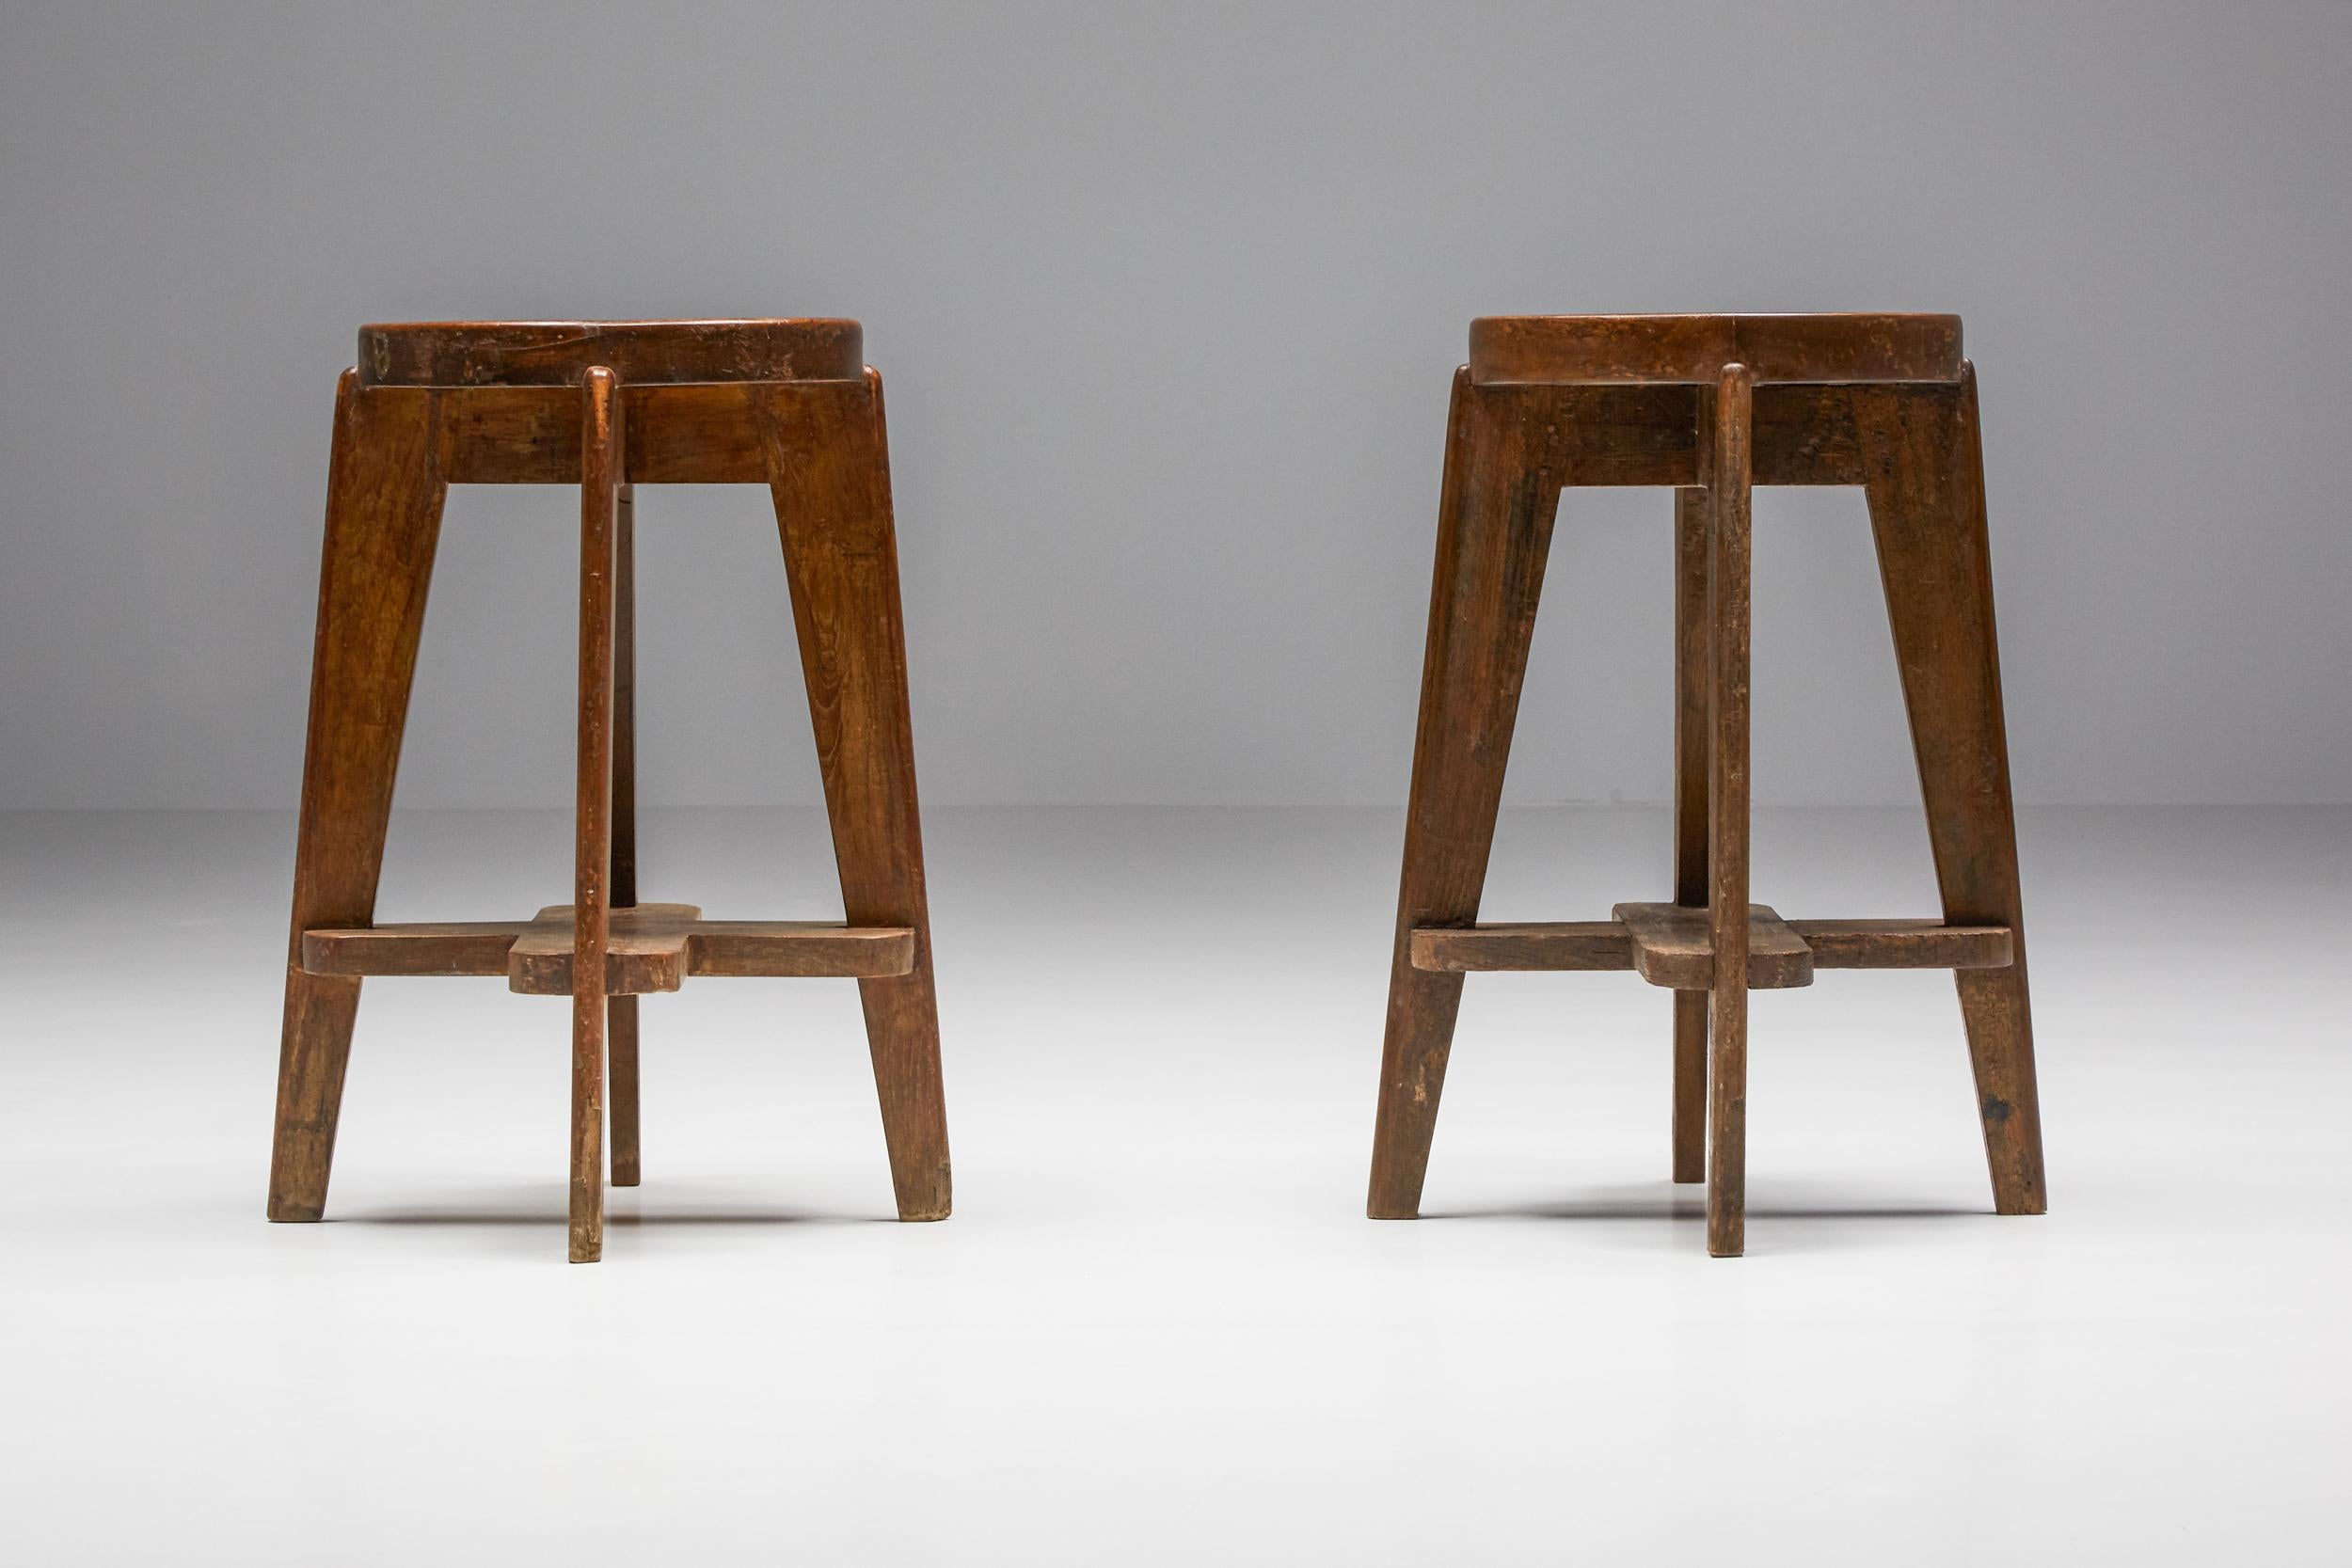 Indian Pierre Jeanneret Chandigarh Stools 'CB', Postmodern influenced by Le Corbusier 